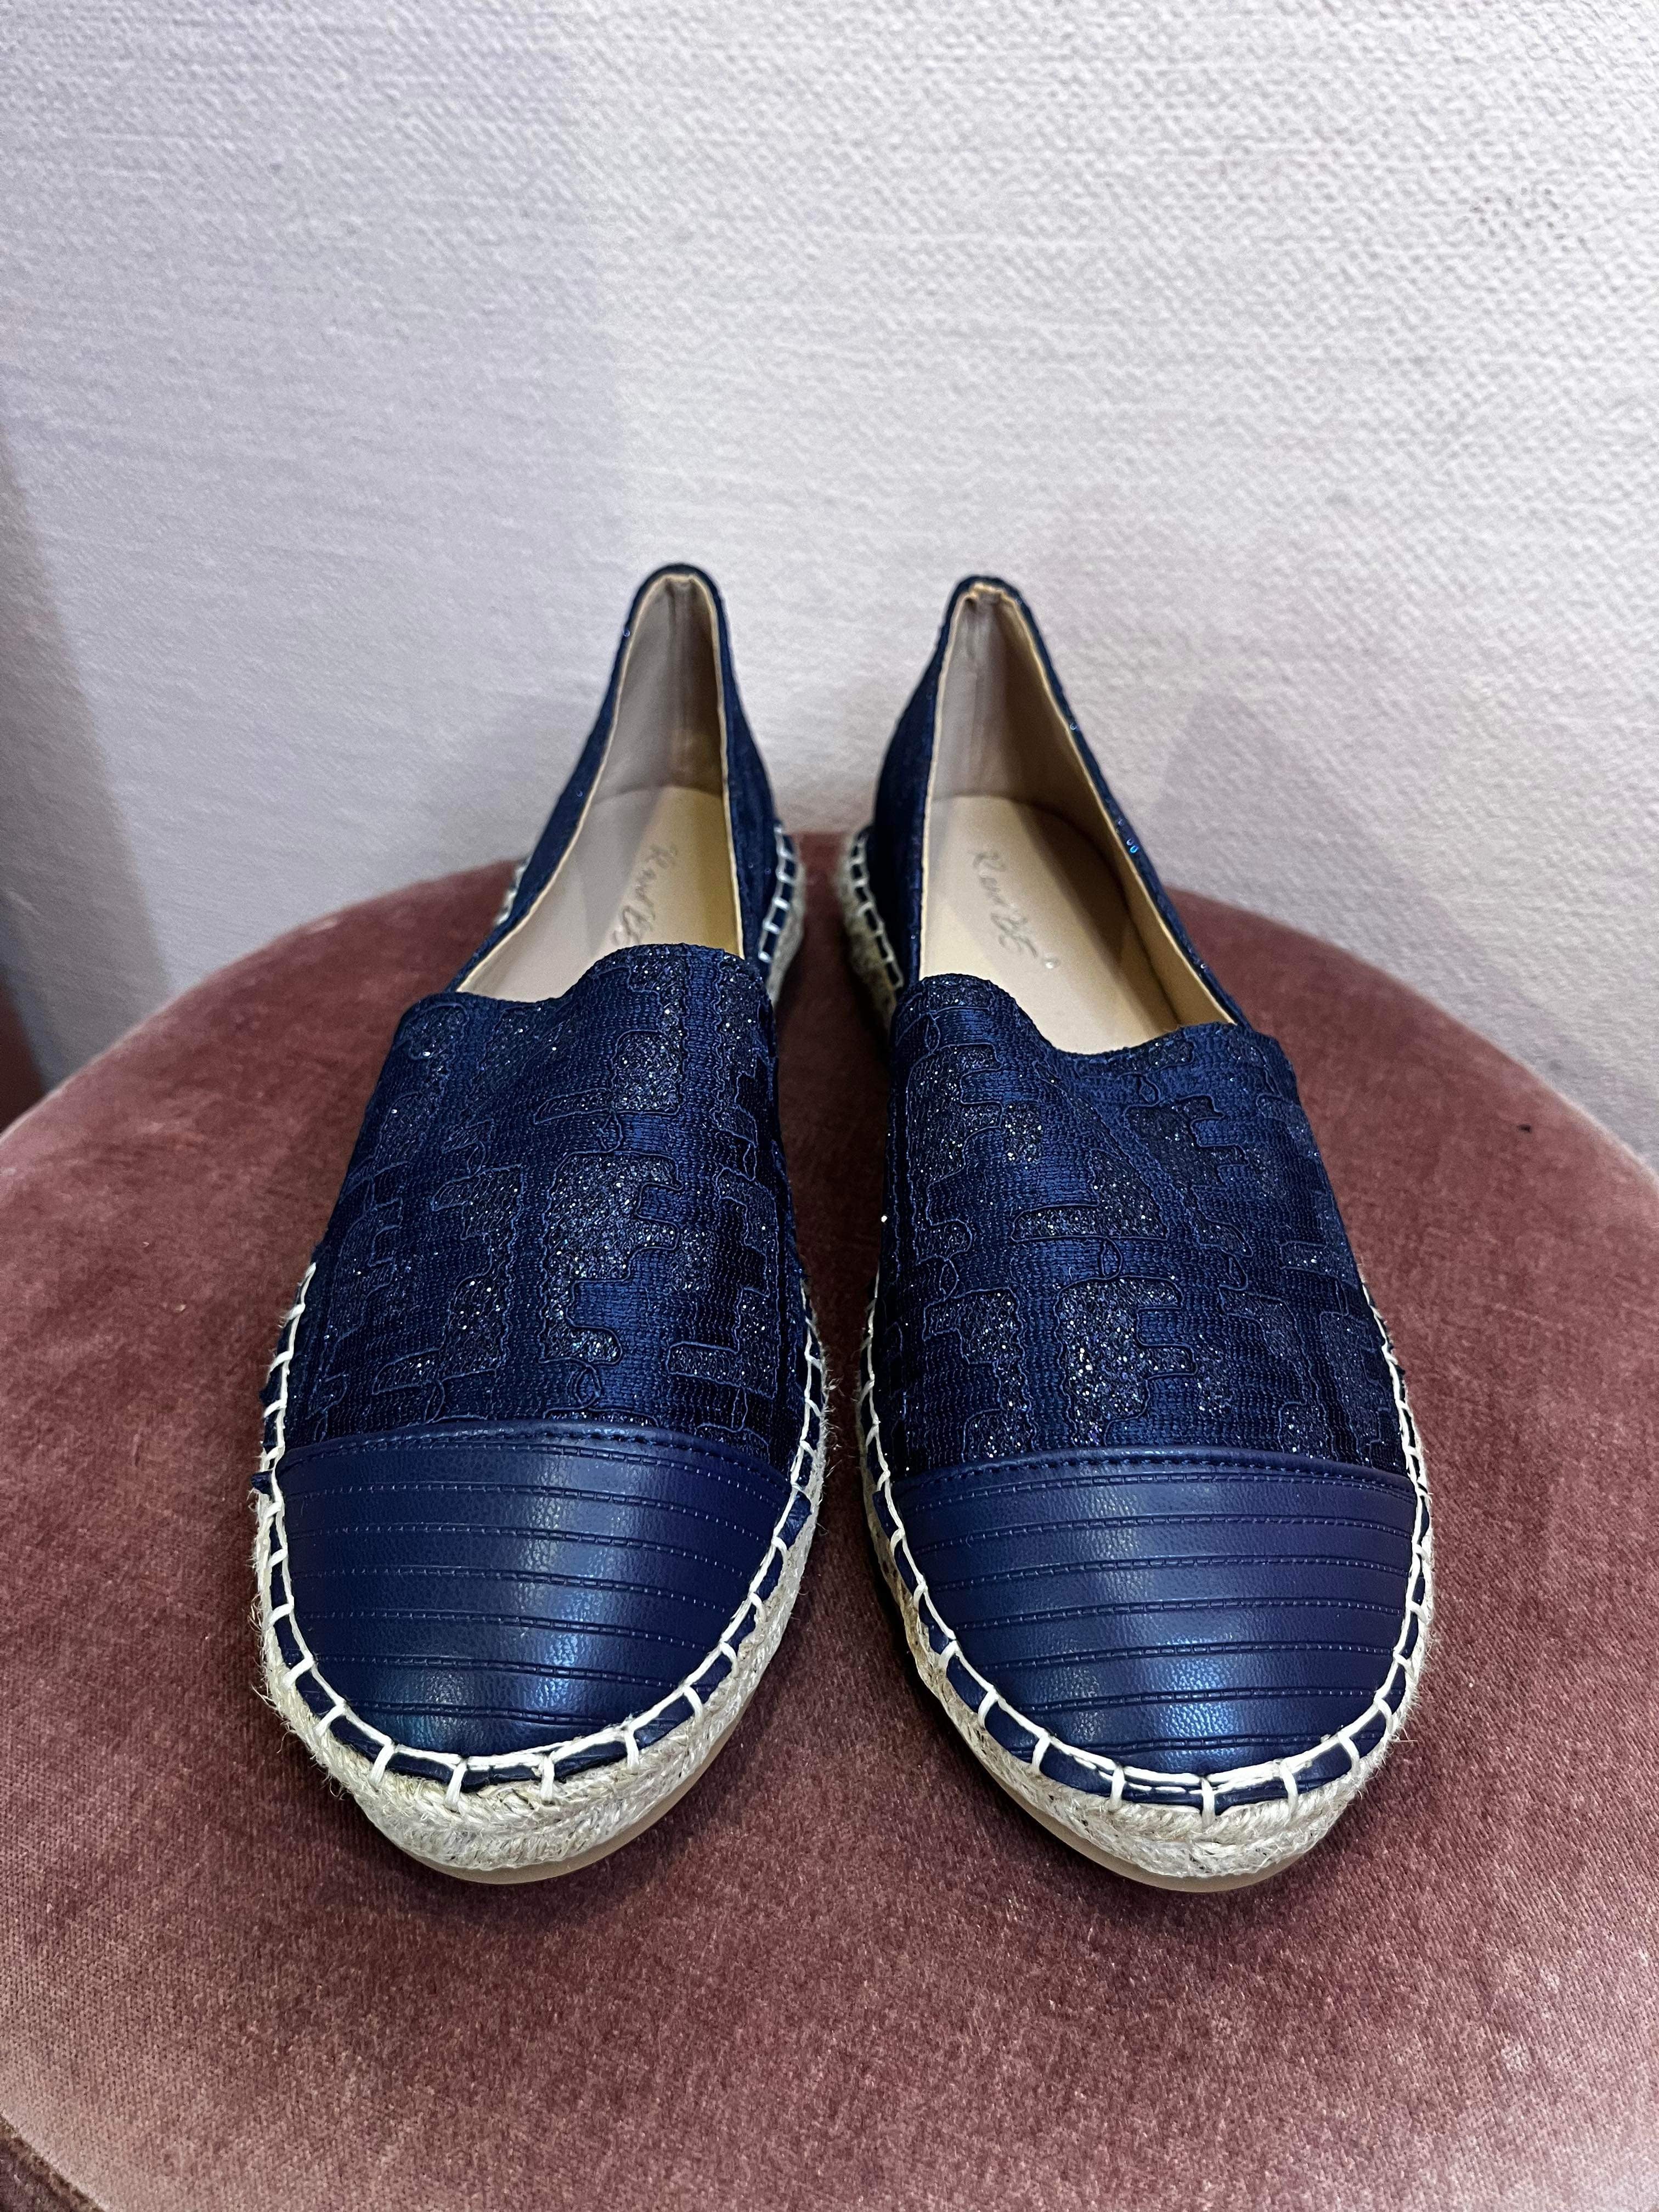 R and B - Loafers - Size: 39